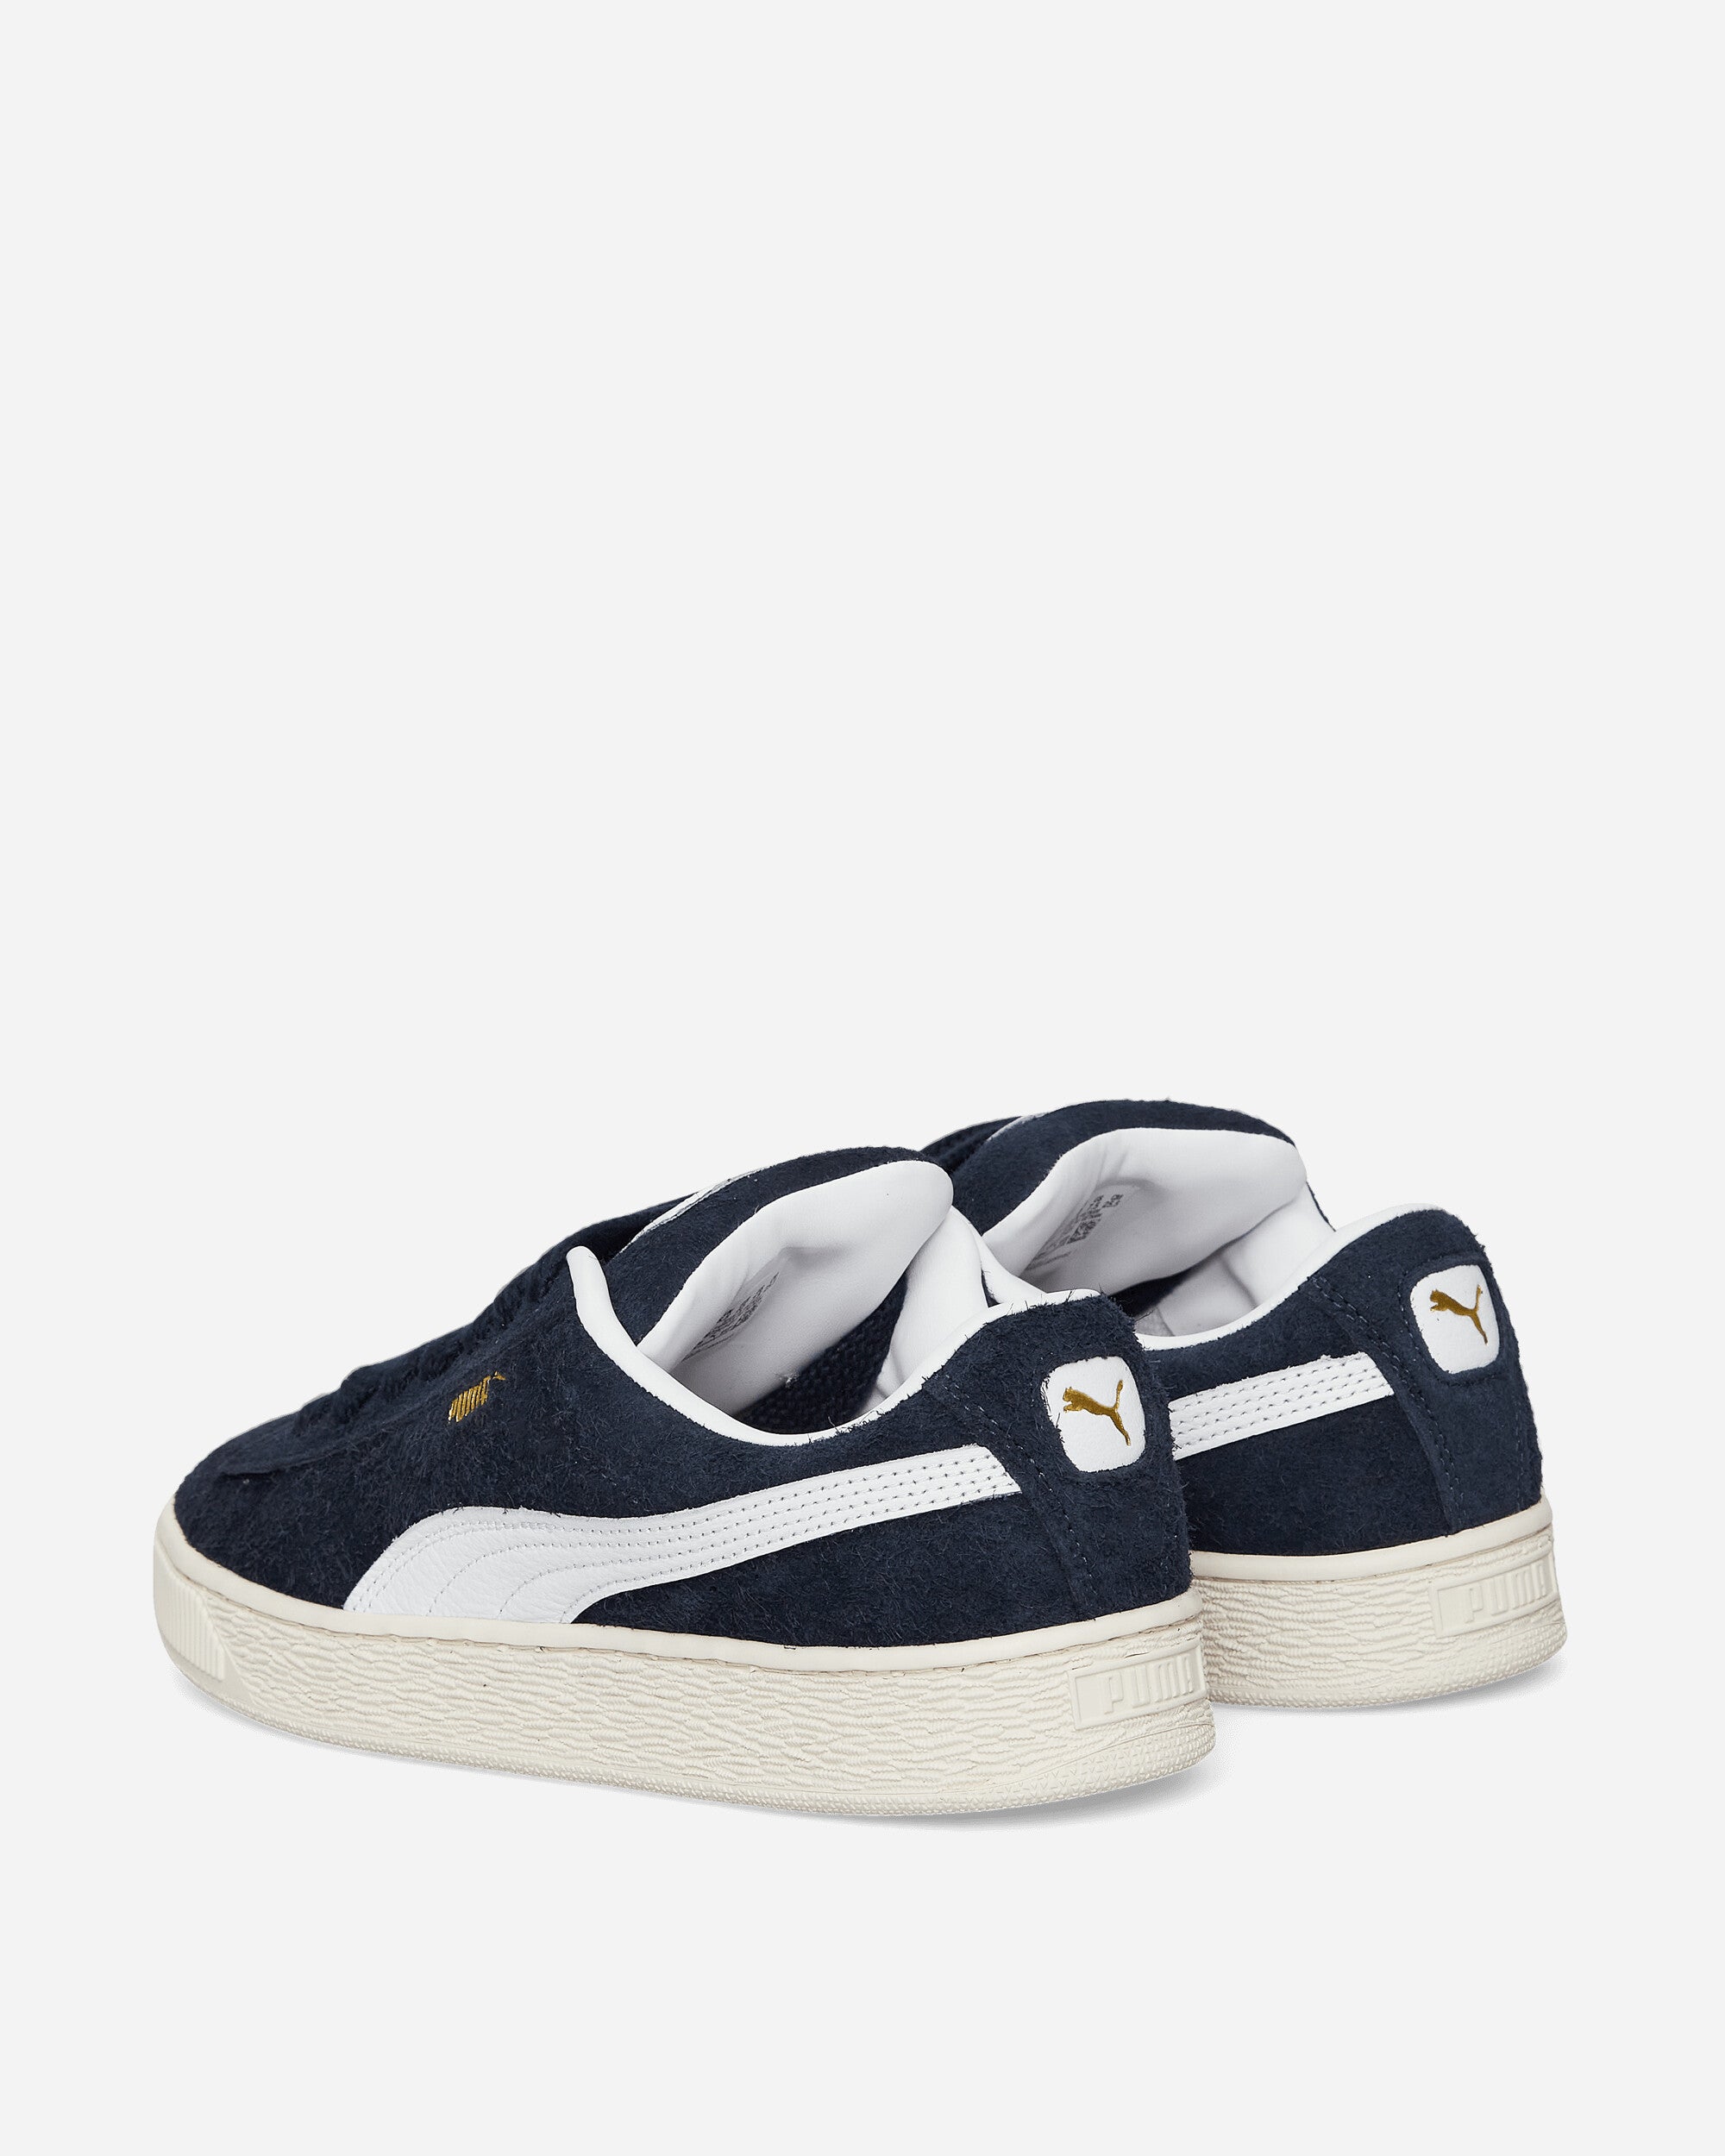 Puma Suede Xl Hairy Club Navy/Frosted Ivory Sneakers Low 397241-01